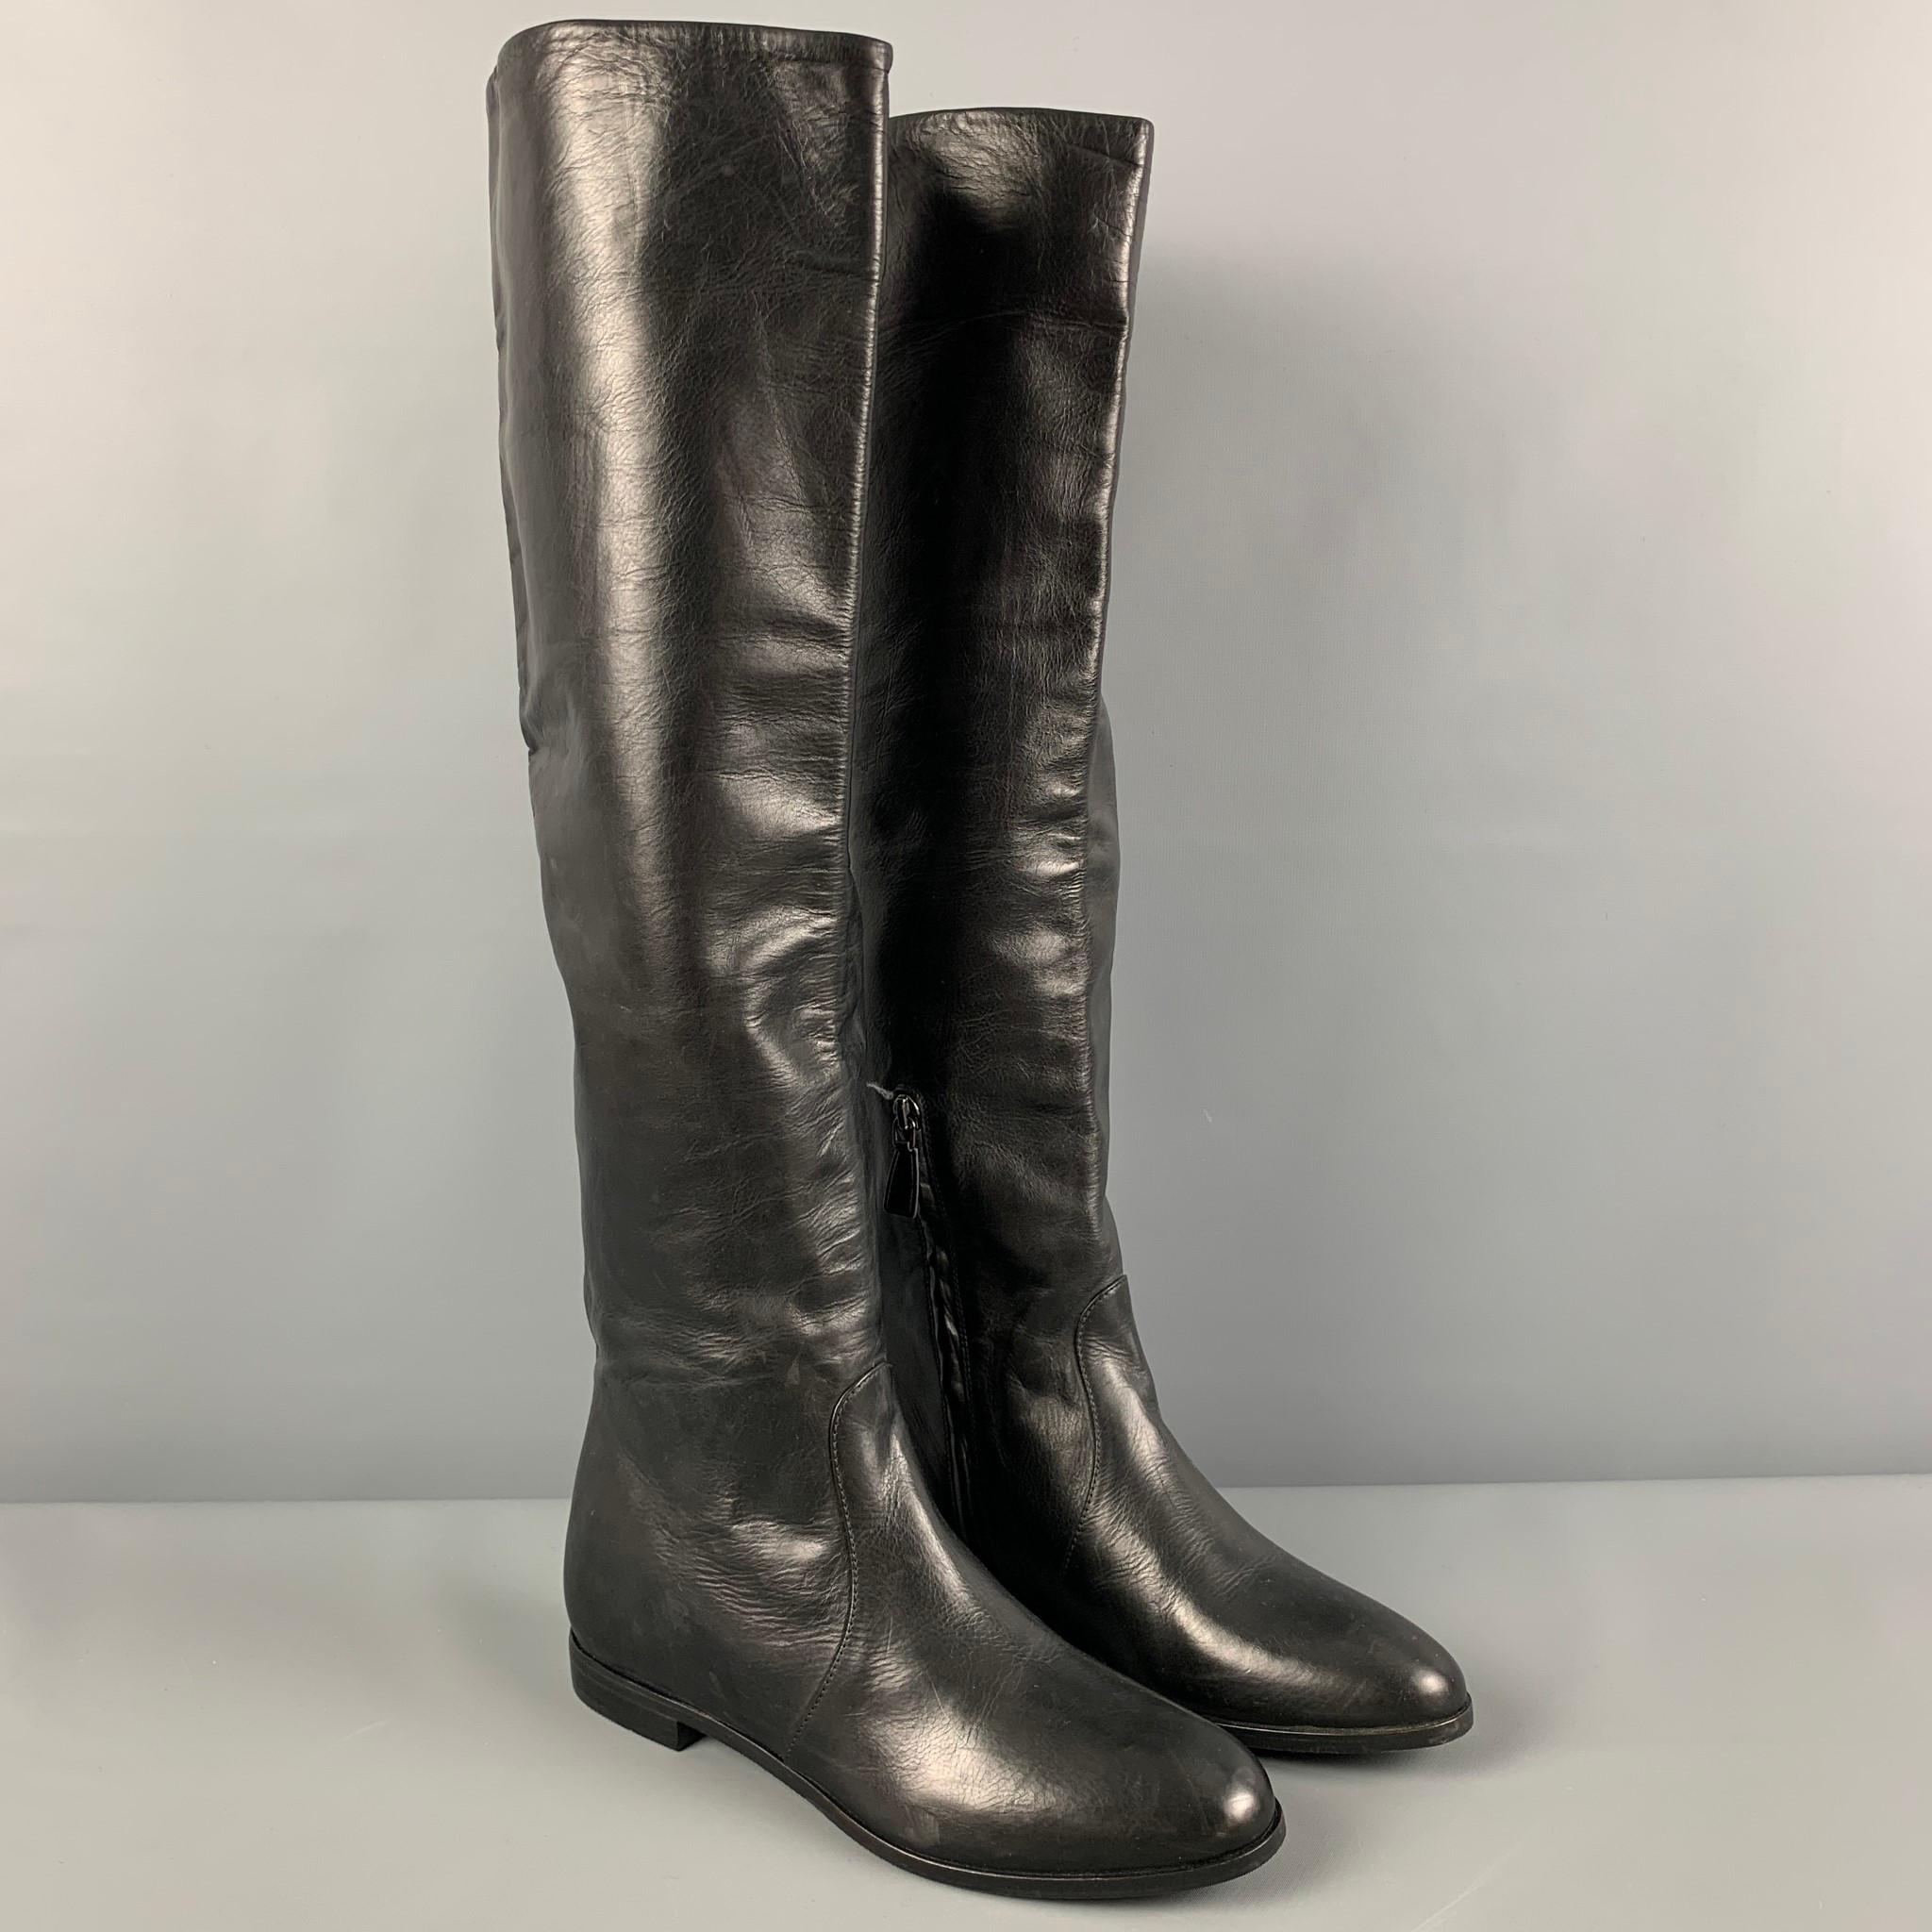 PRADA boots comes in a black leather featuring a flat heel and aside zipper closure. Made in Italy.

Very Good Pre-Owned Condition.
Marked: 37.5
Original Retail Price: $1,620.00

Measurements:

Length: 10 in.
Width: 3.5 in.
Height: 20 in.